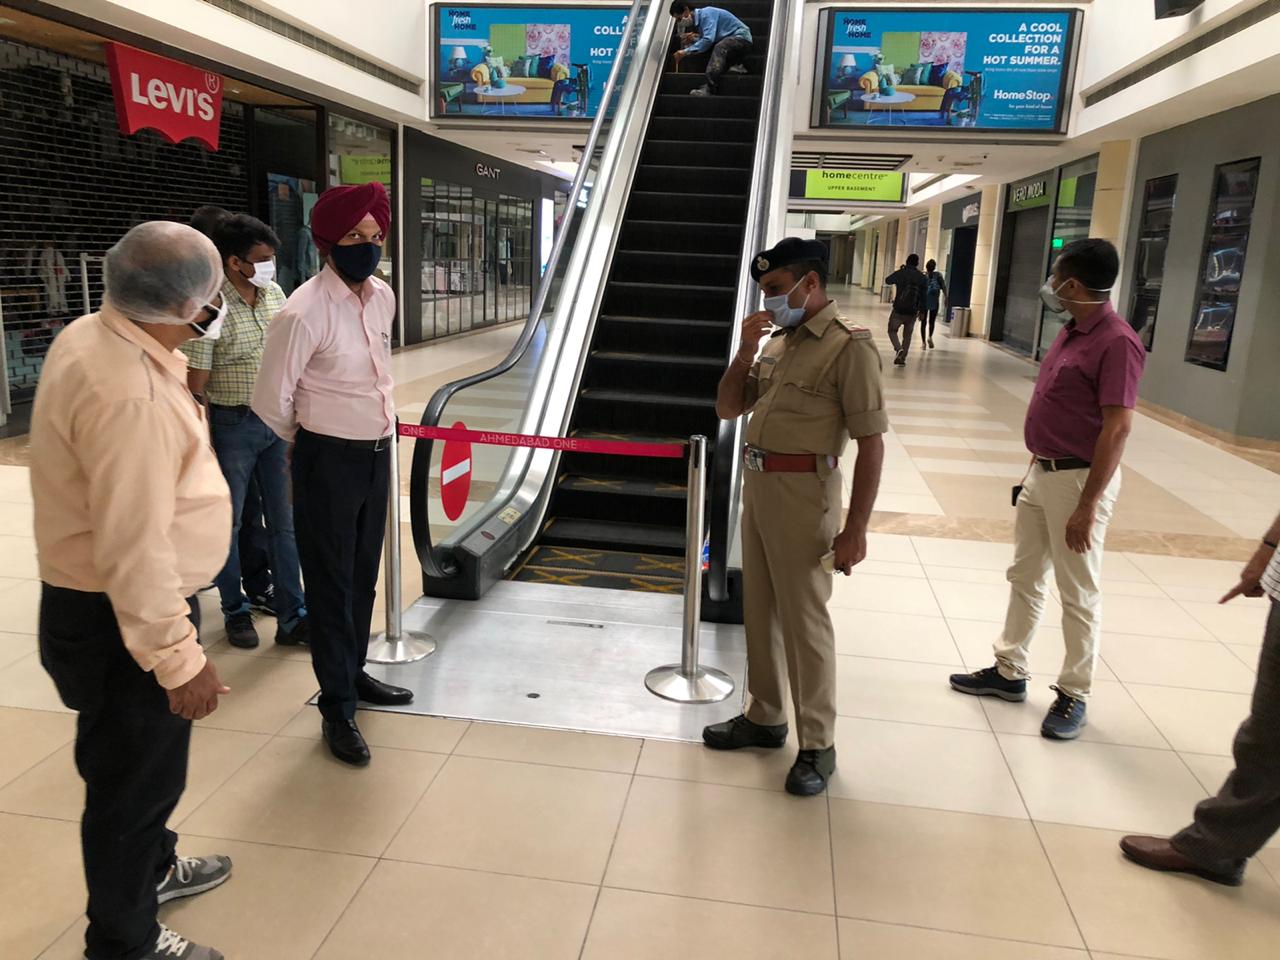 Police visited the mall before the mall opened and provided guidance